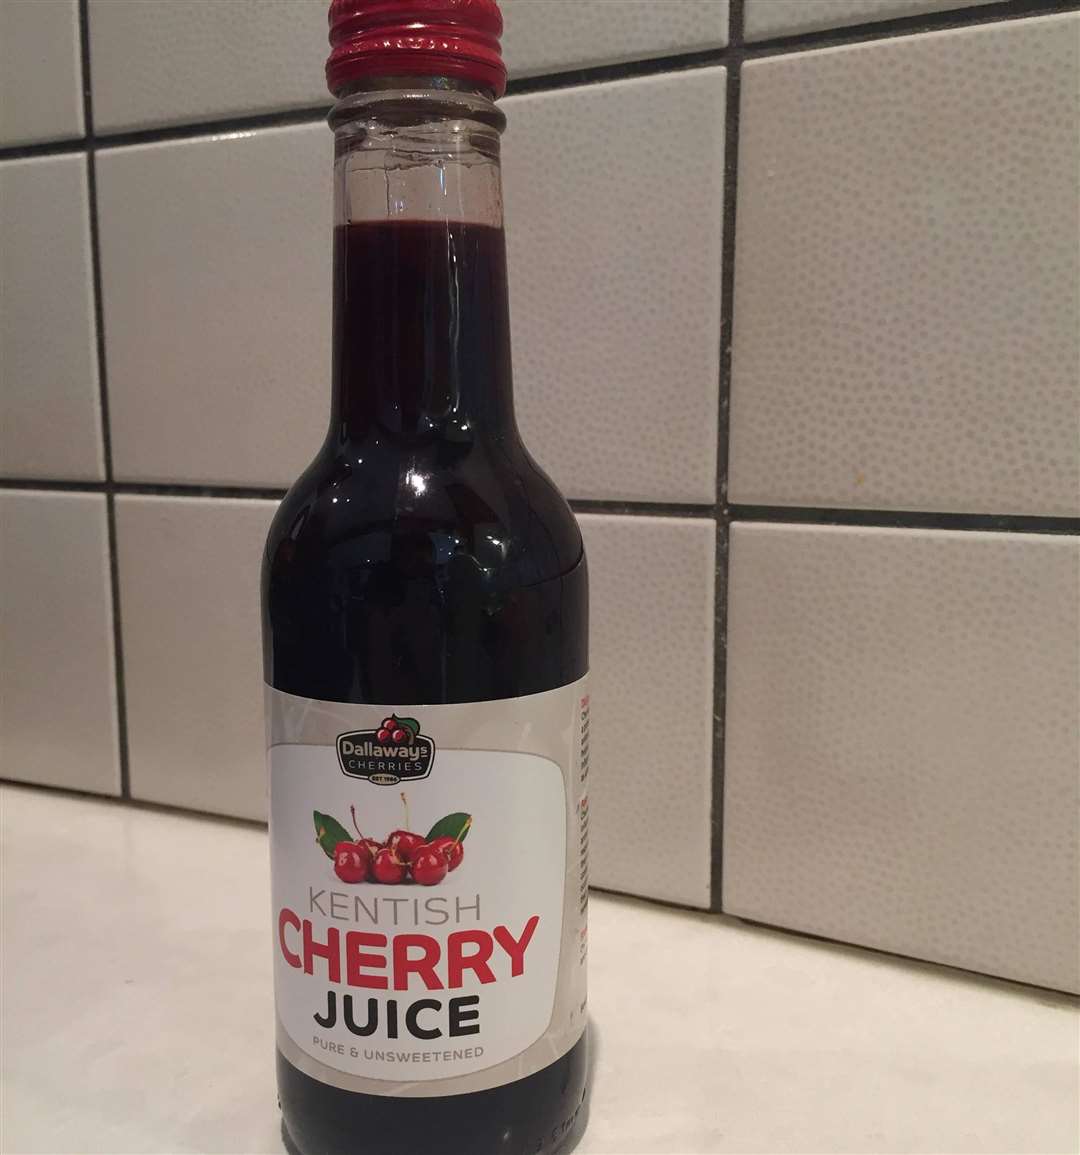 Cherry juice from Dallaway £3